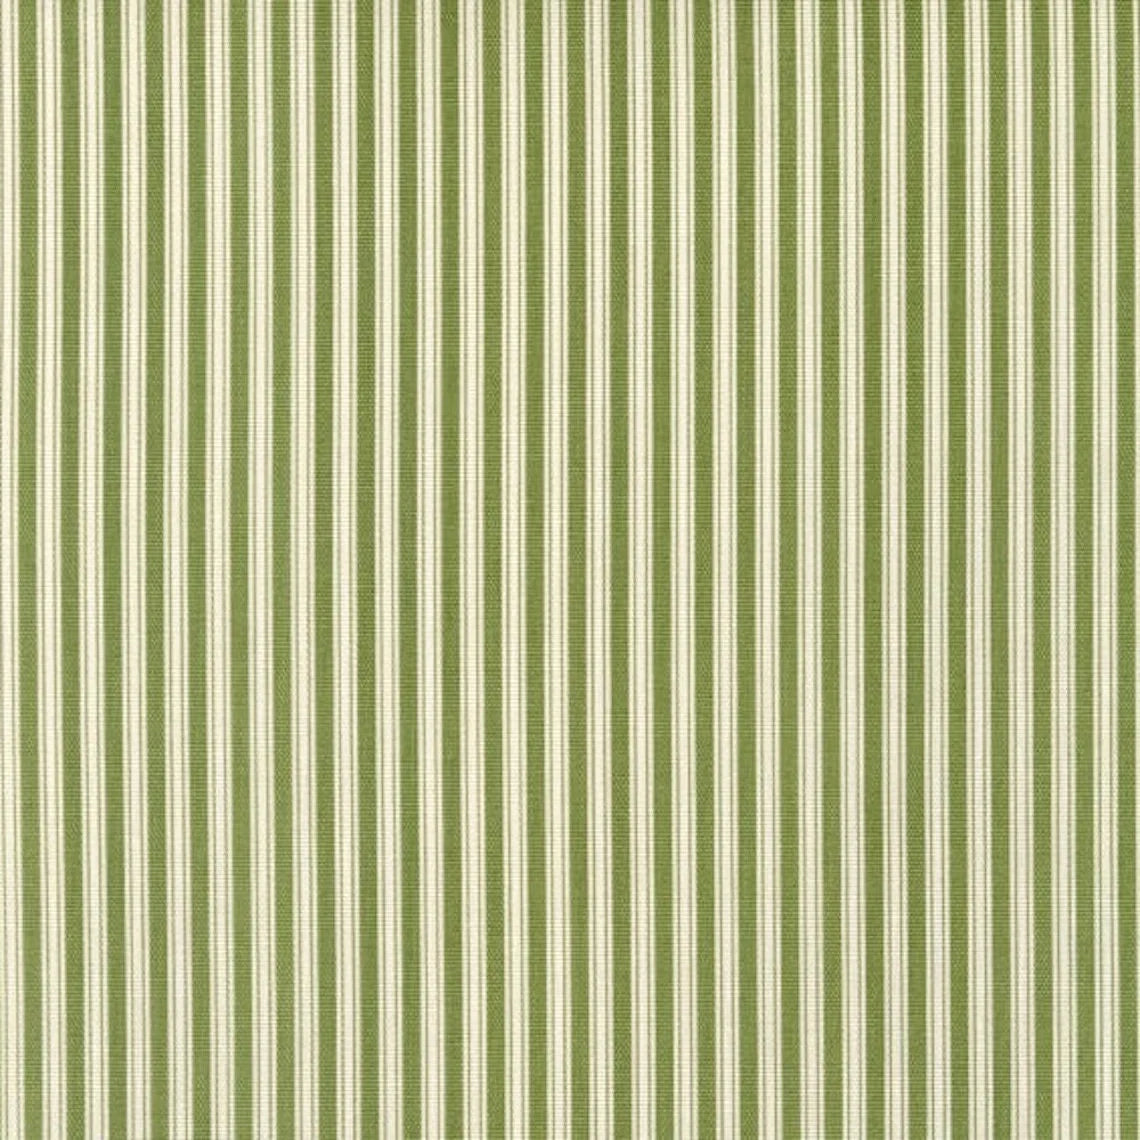 tailored tier cafe curtain panels pair in polo jungle green stripe on cream